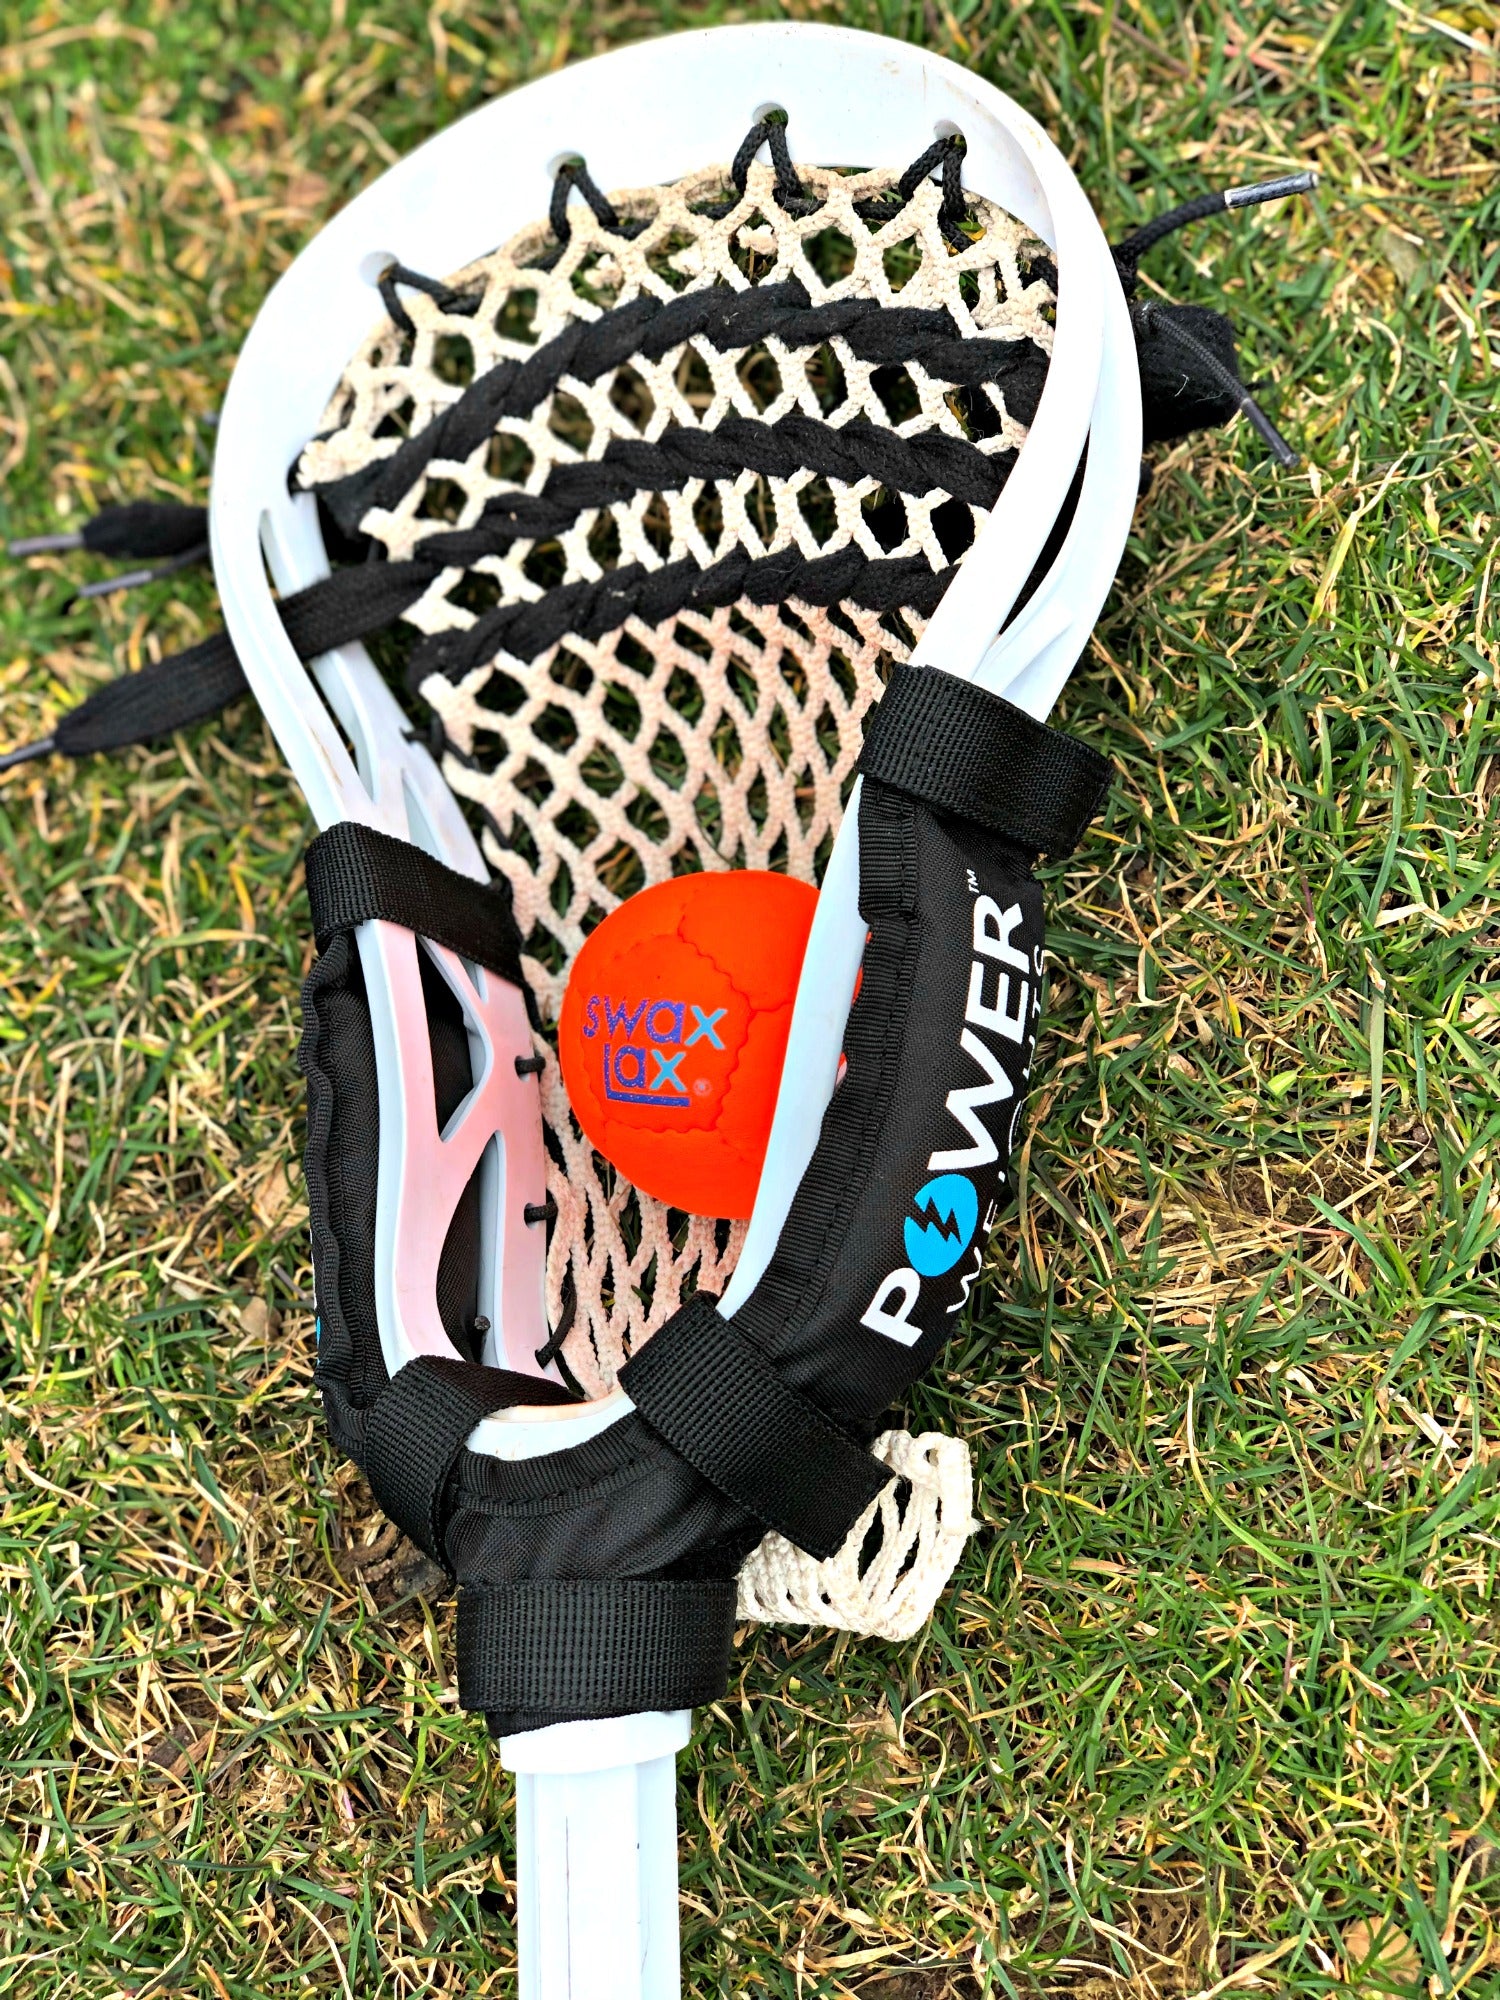 Swax Lax Power Weights on boy's lacrosse stick